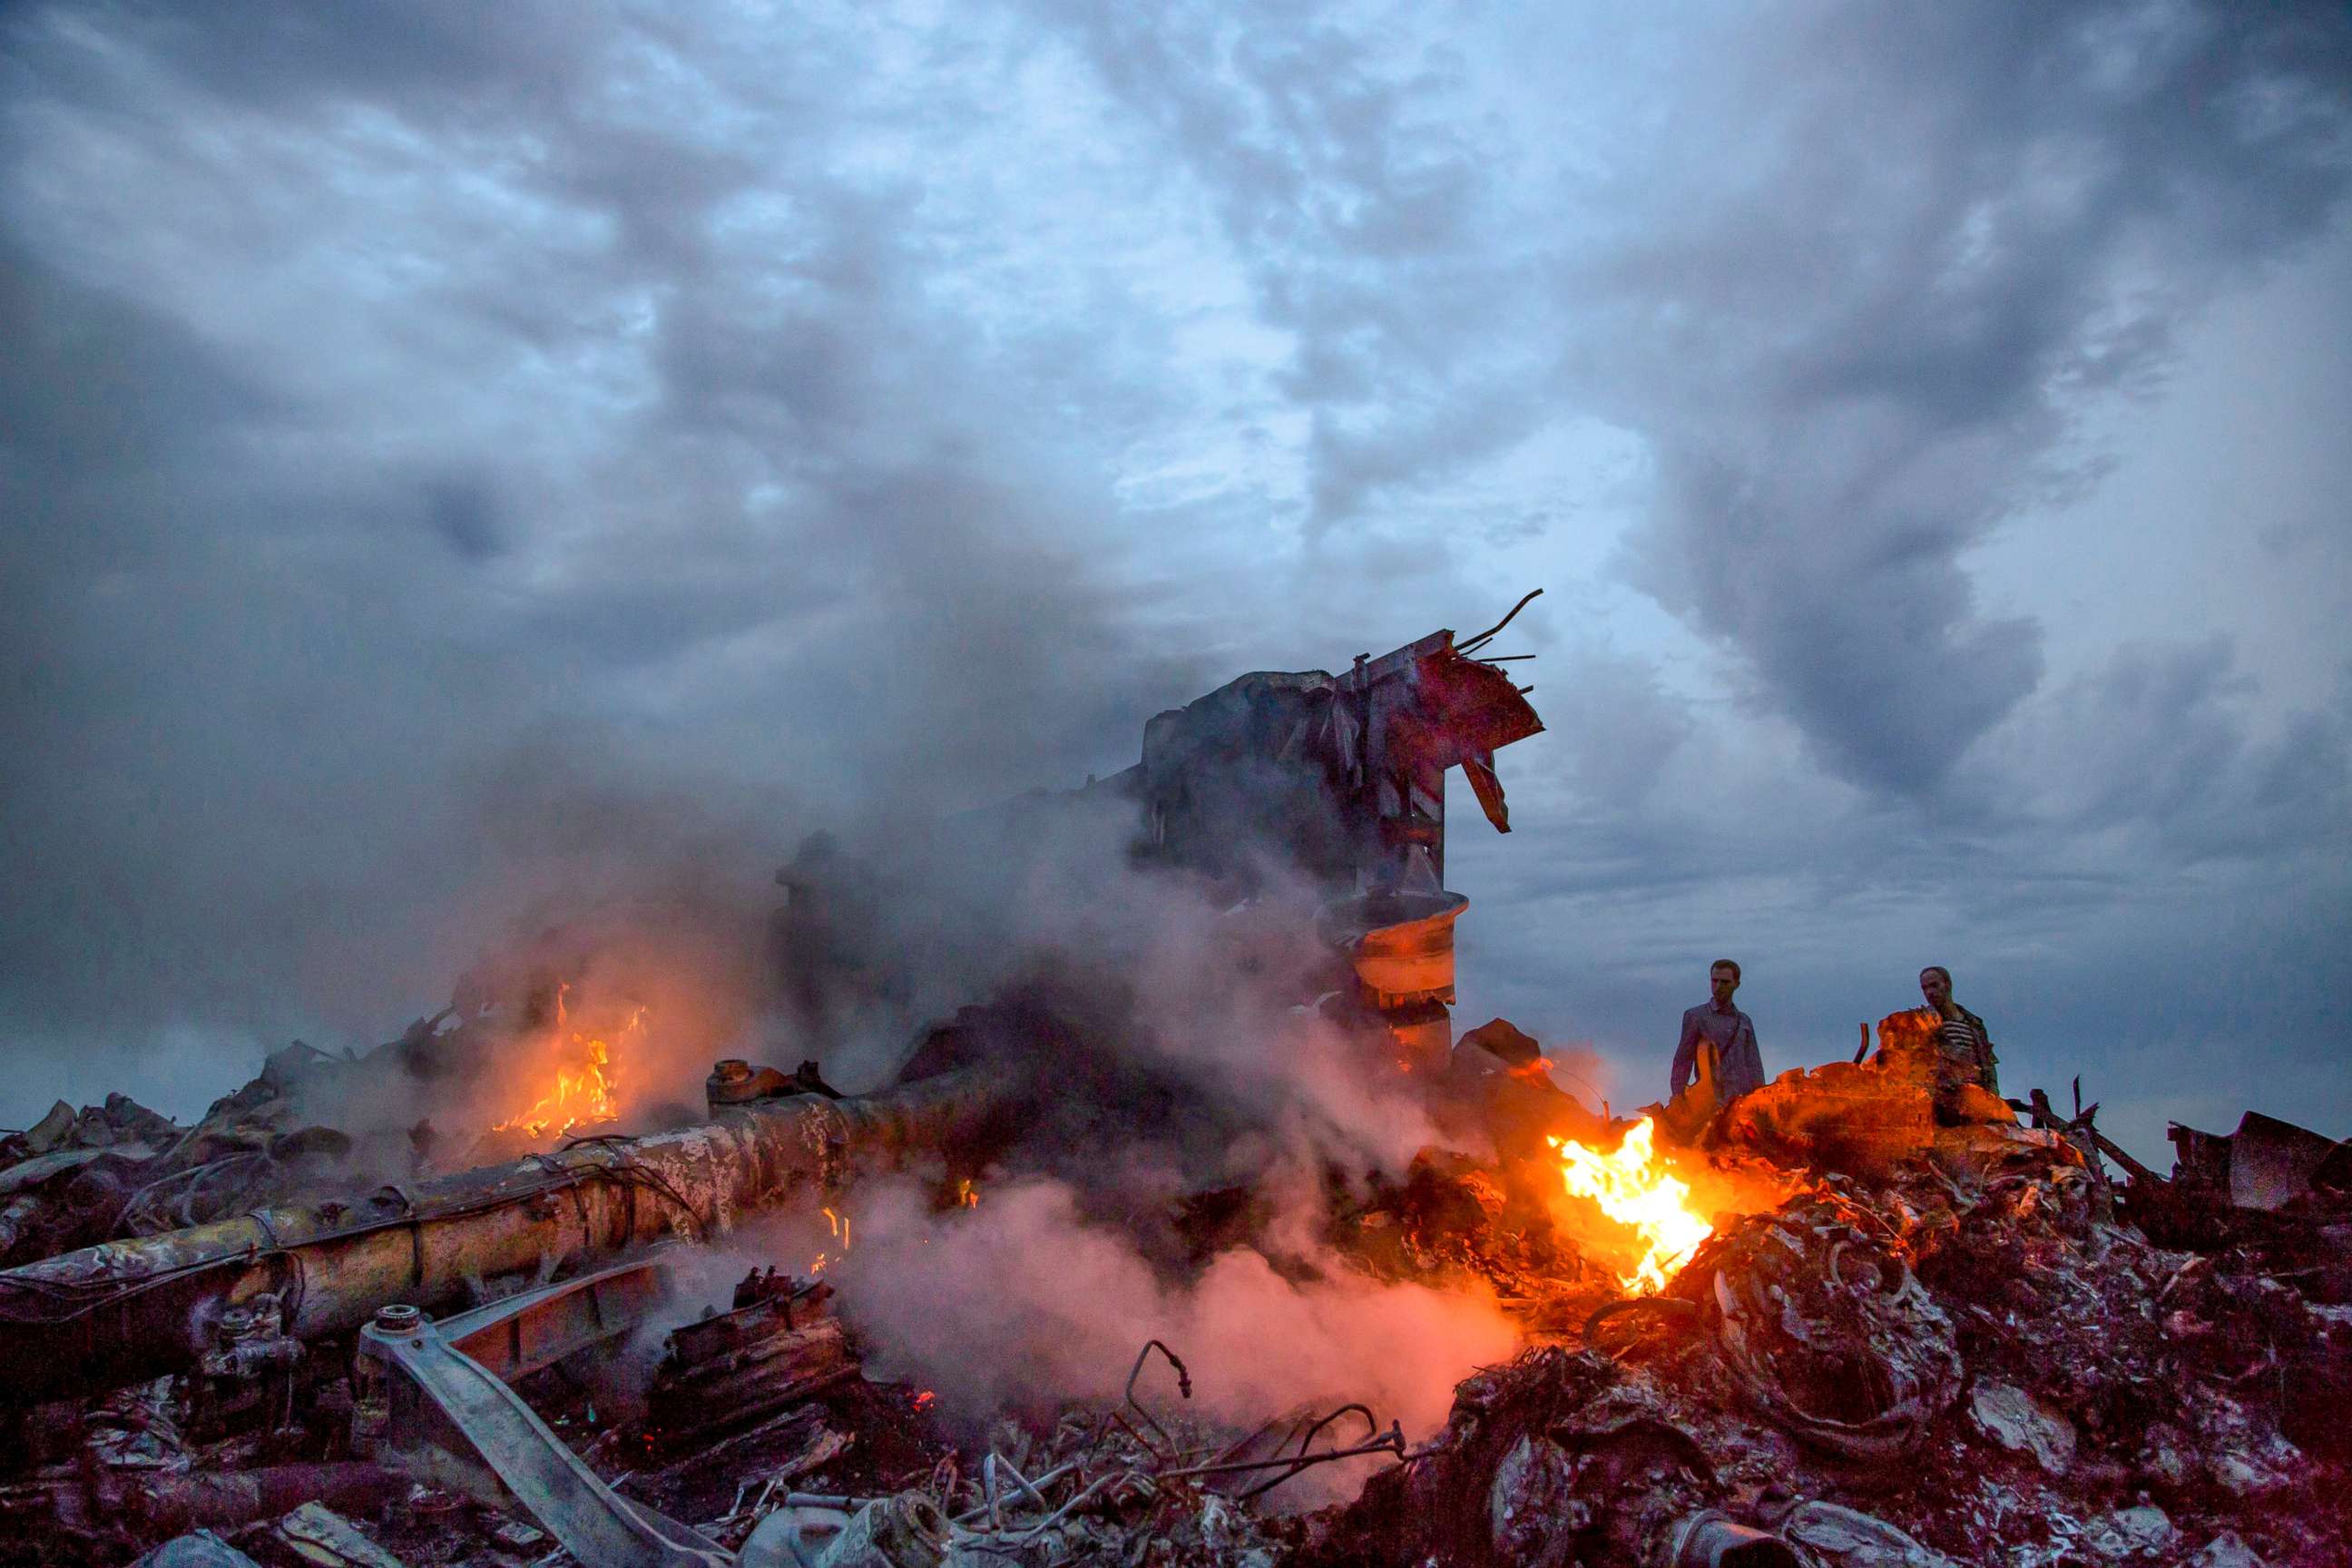 PHOTO: People walk through the debris at the crash site of Malaysia Airlines Flight 17 near the village of Grabove, Ukraine, July 17, 2014.